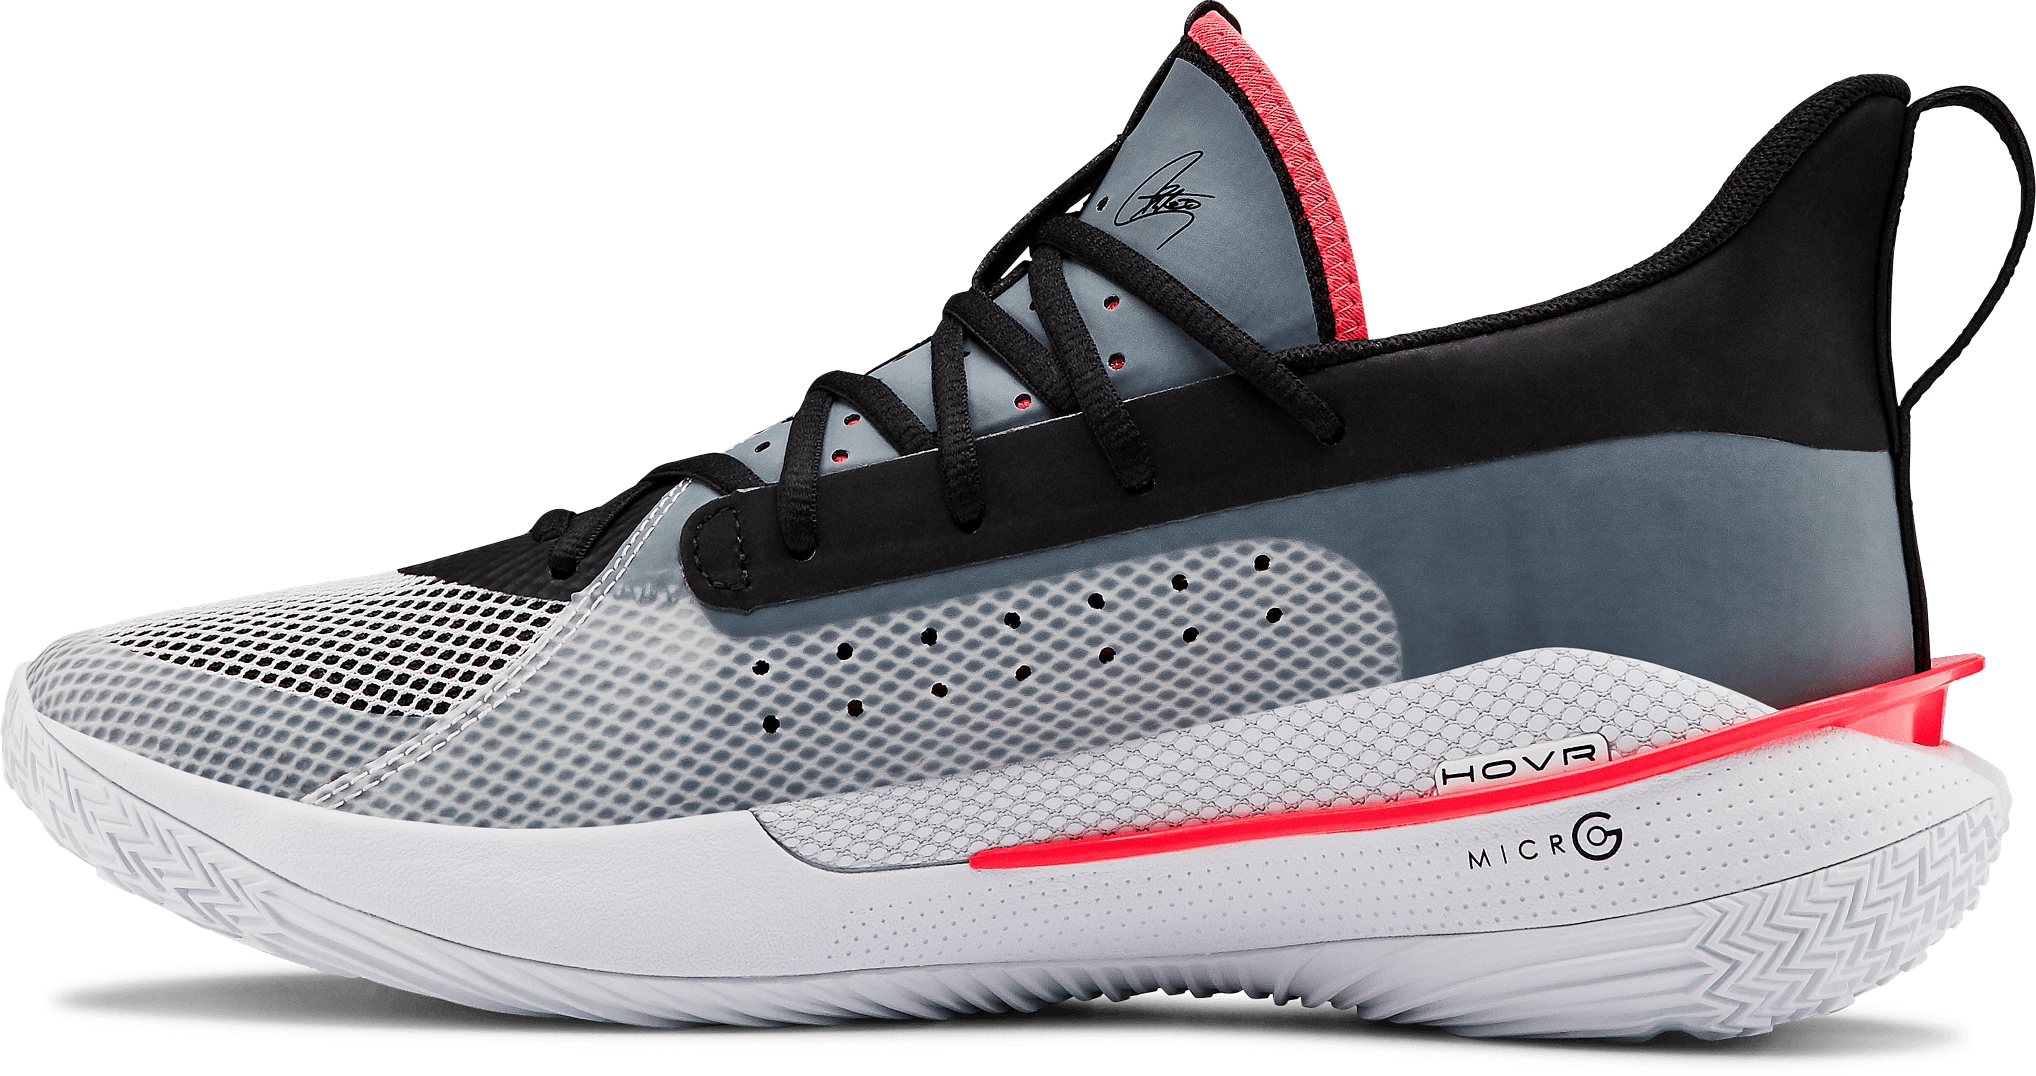 Under Armour Curry 7 - Review, Deals, Pics of 25 Colorways